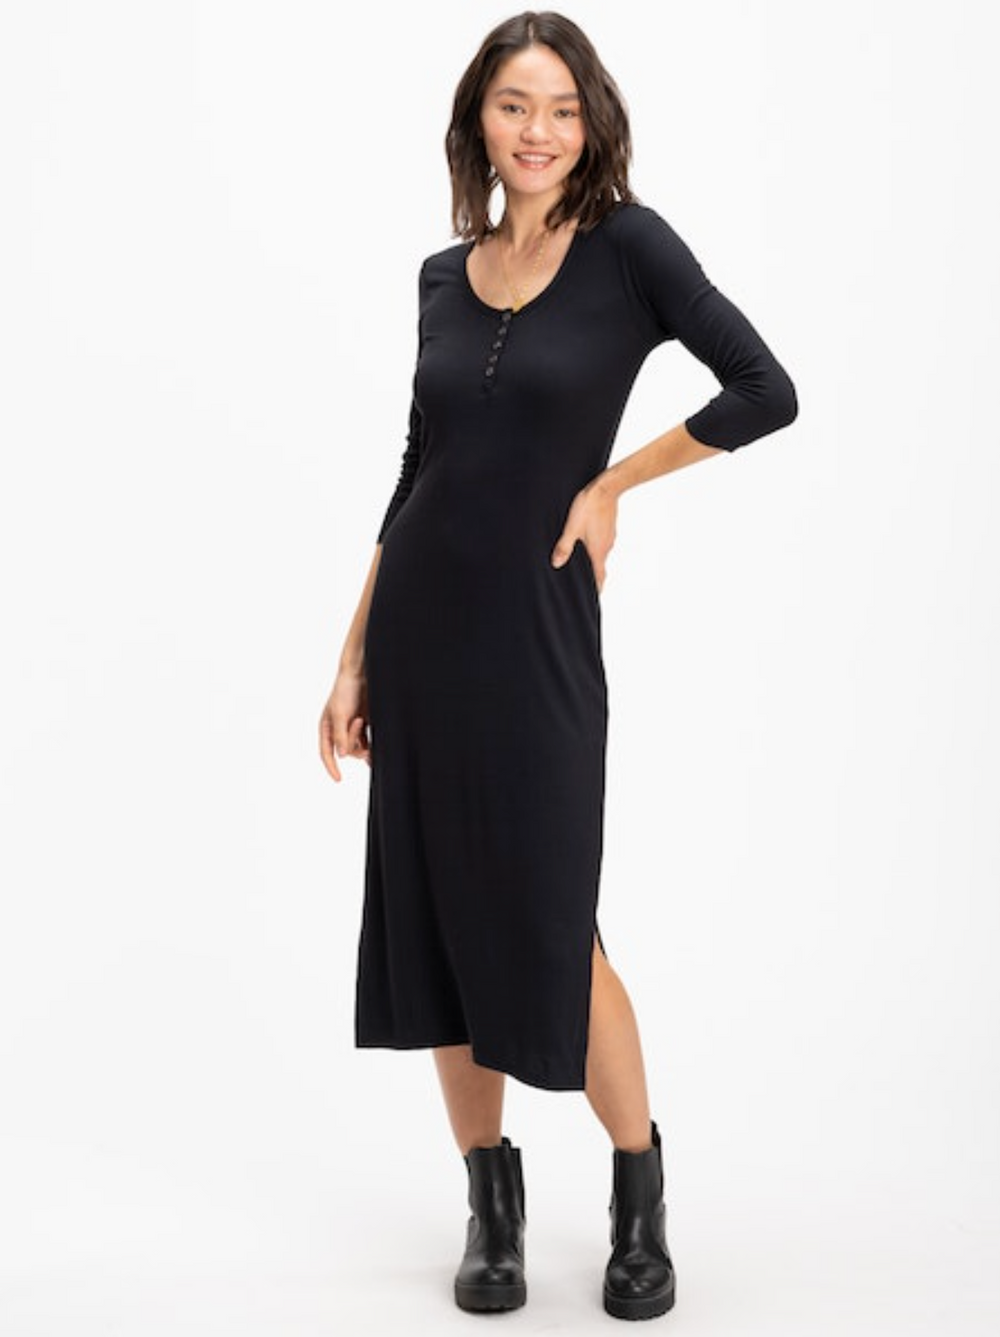 Threads 4 Thought dress, Lois ribbed henley